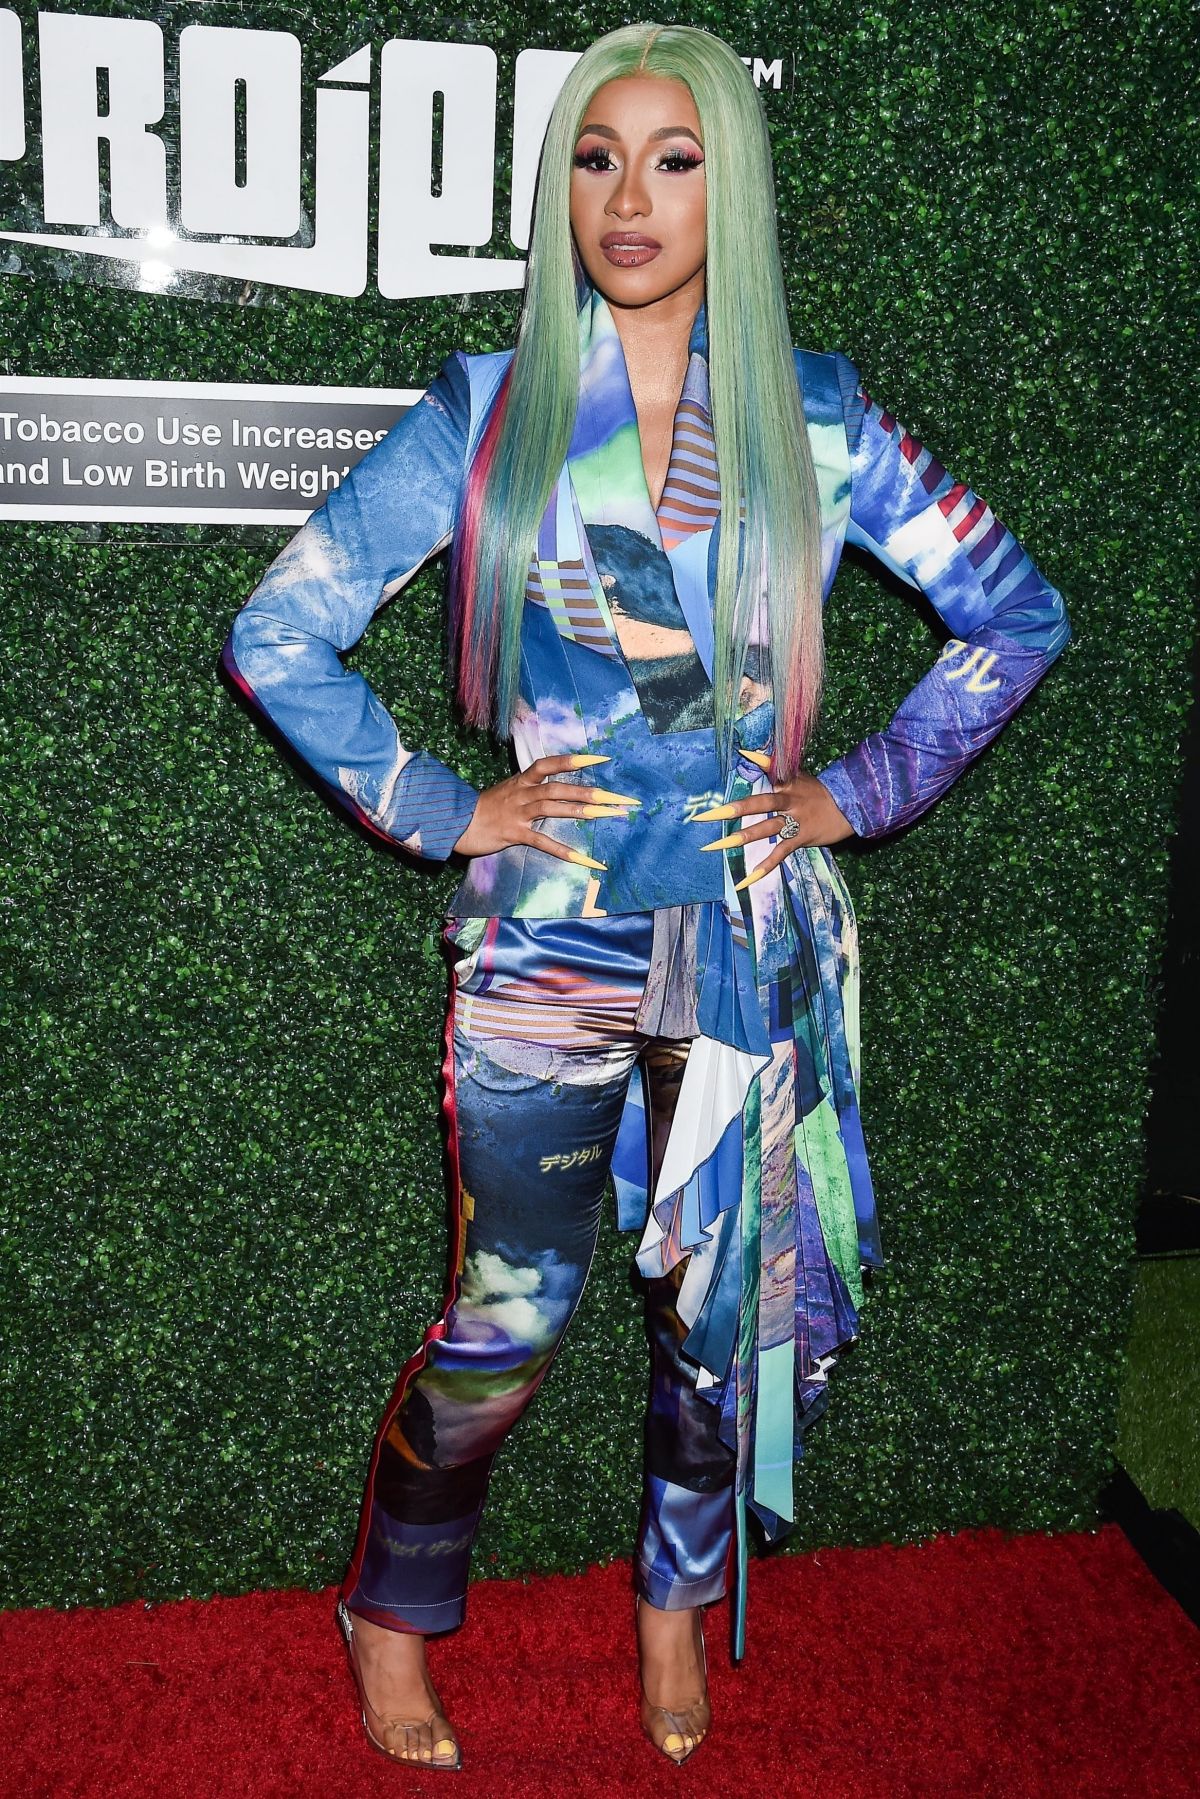 cardi-b-at-swisher-sweets-awards-in-west-hollywood-04-12-2019-7.jpg